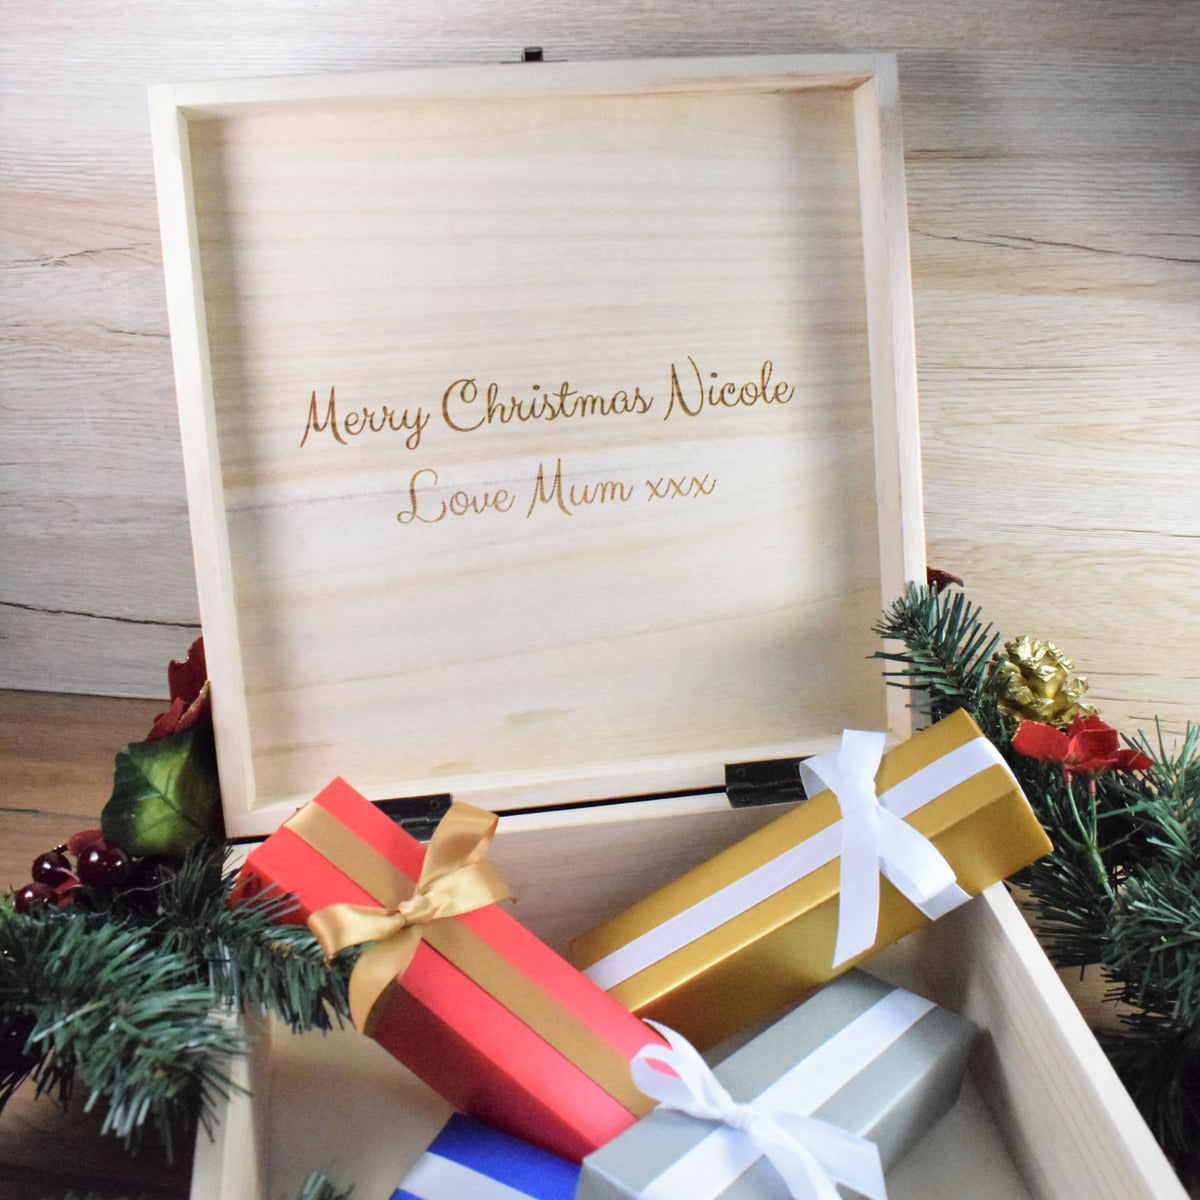 Personalised Wooden Christmas Eve Box - Christmas Post